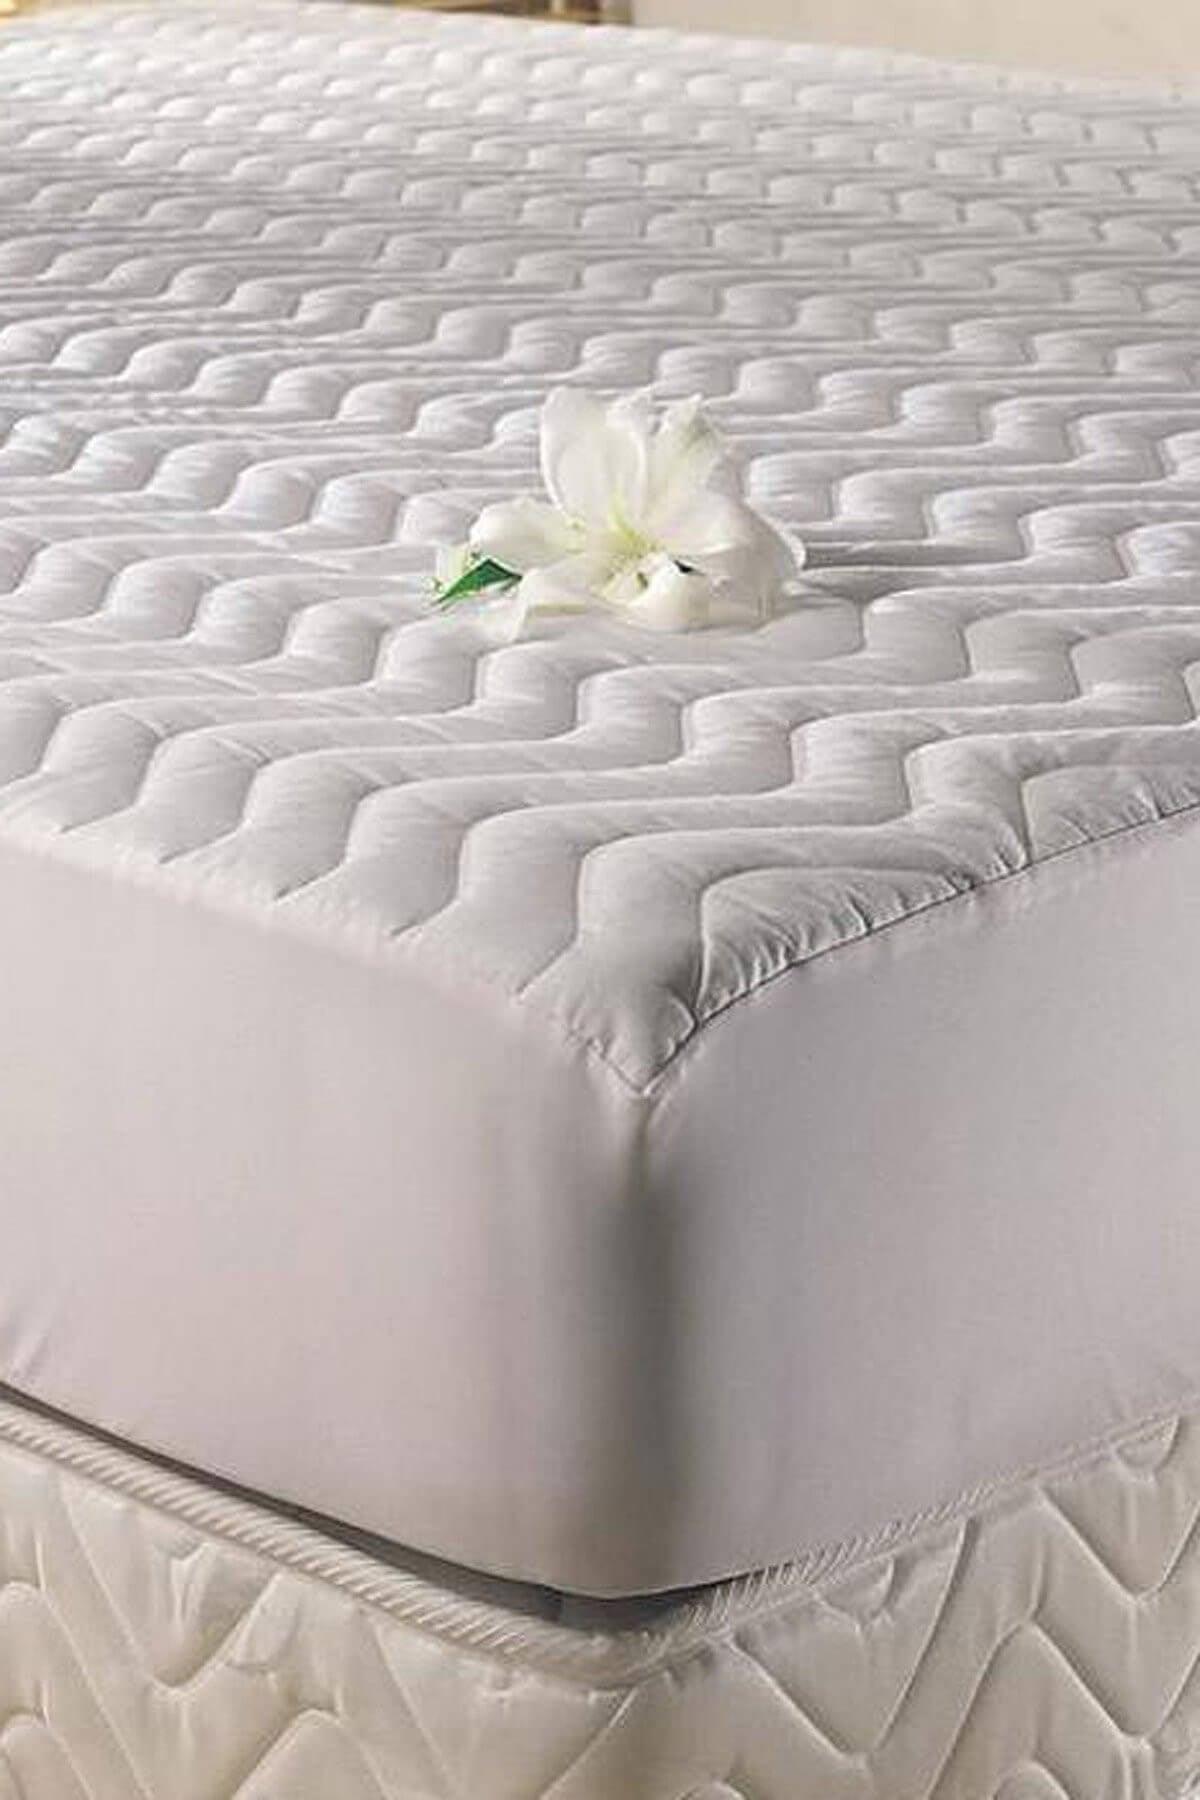 Double Quilted Bed Mattress 160x200 - Swordslife